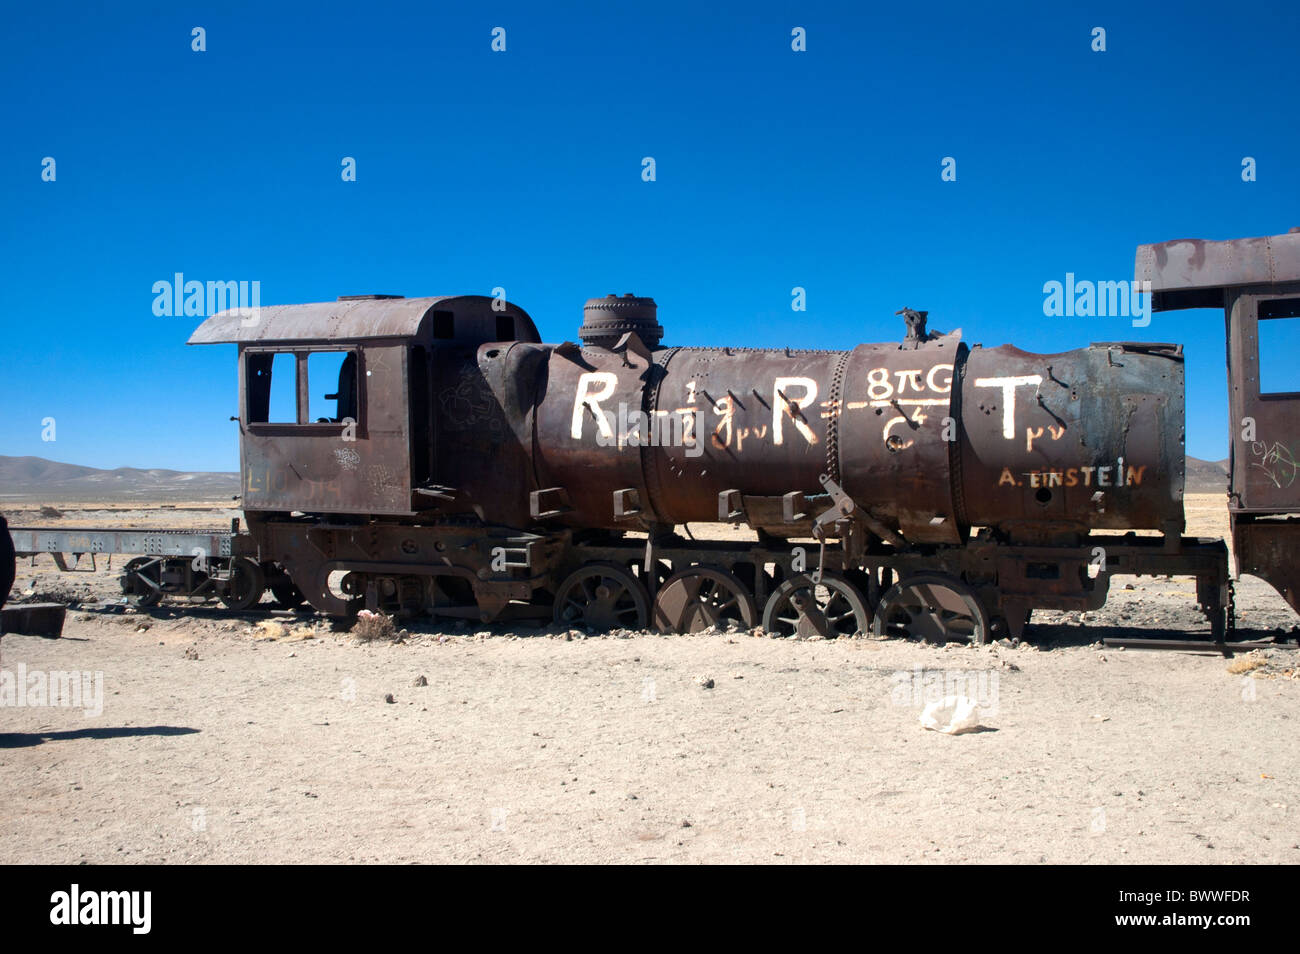 An old steam engine at the Cementterio de Trenes, train cemetery of trains, at Uyuni, Bolivia. Stock Photo